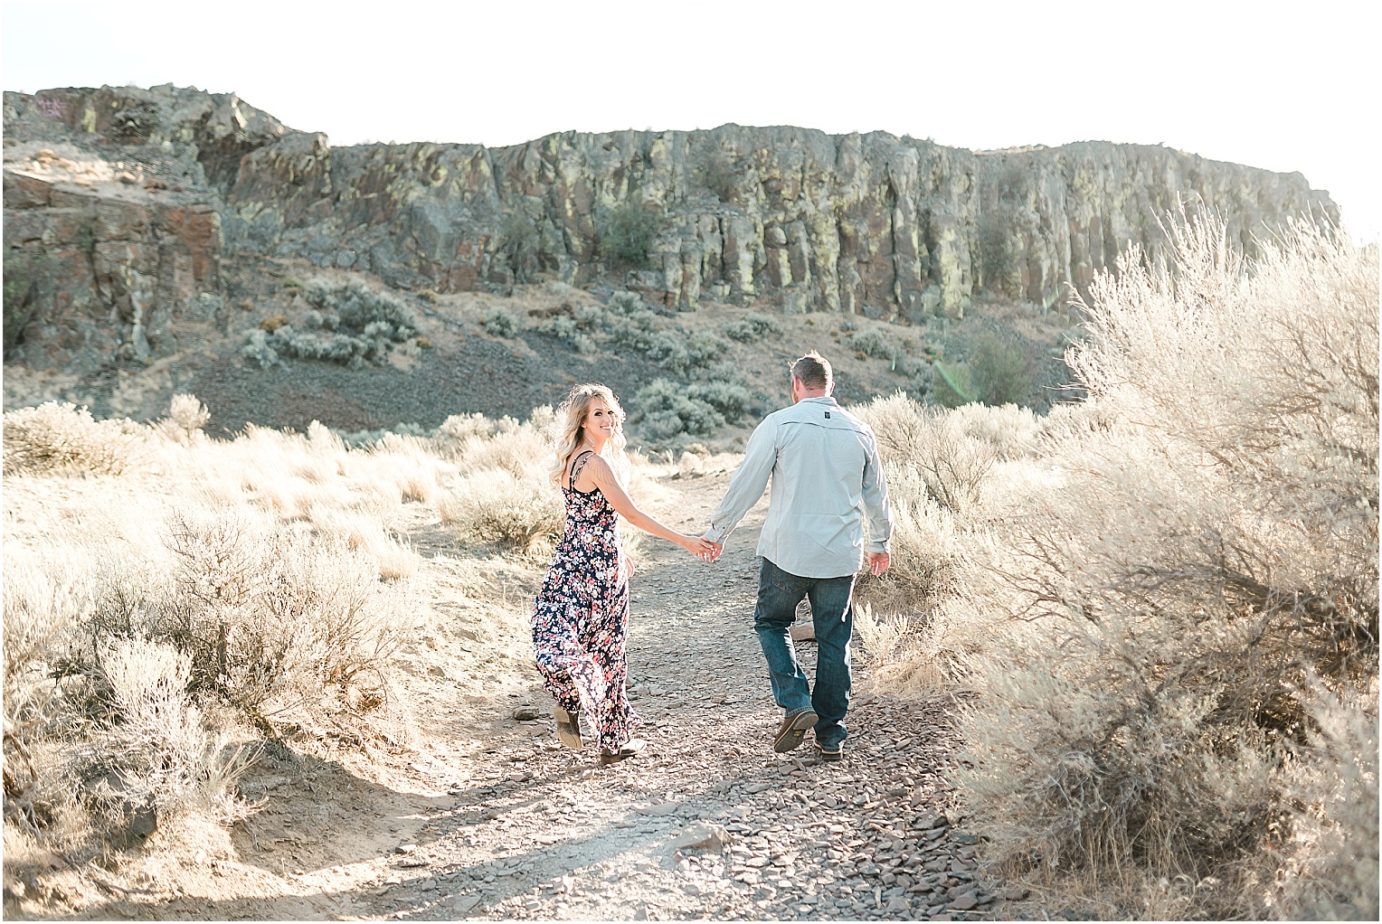 Frenchman Coulee Engagement Session Vantage WA Michael and Carley walking down the trail